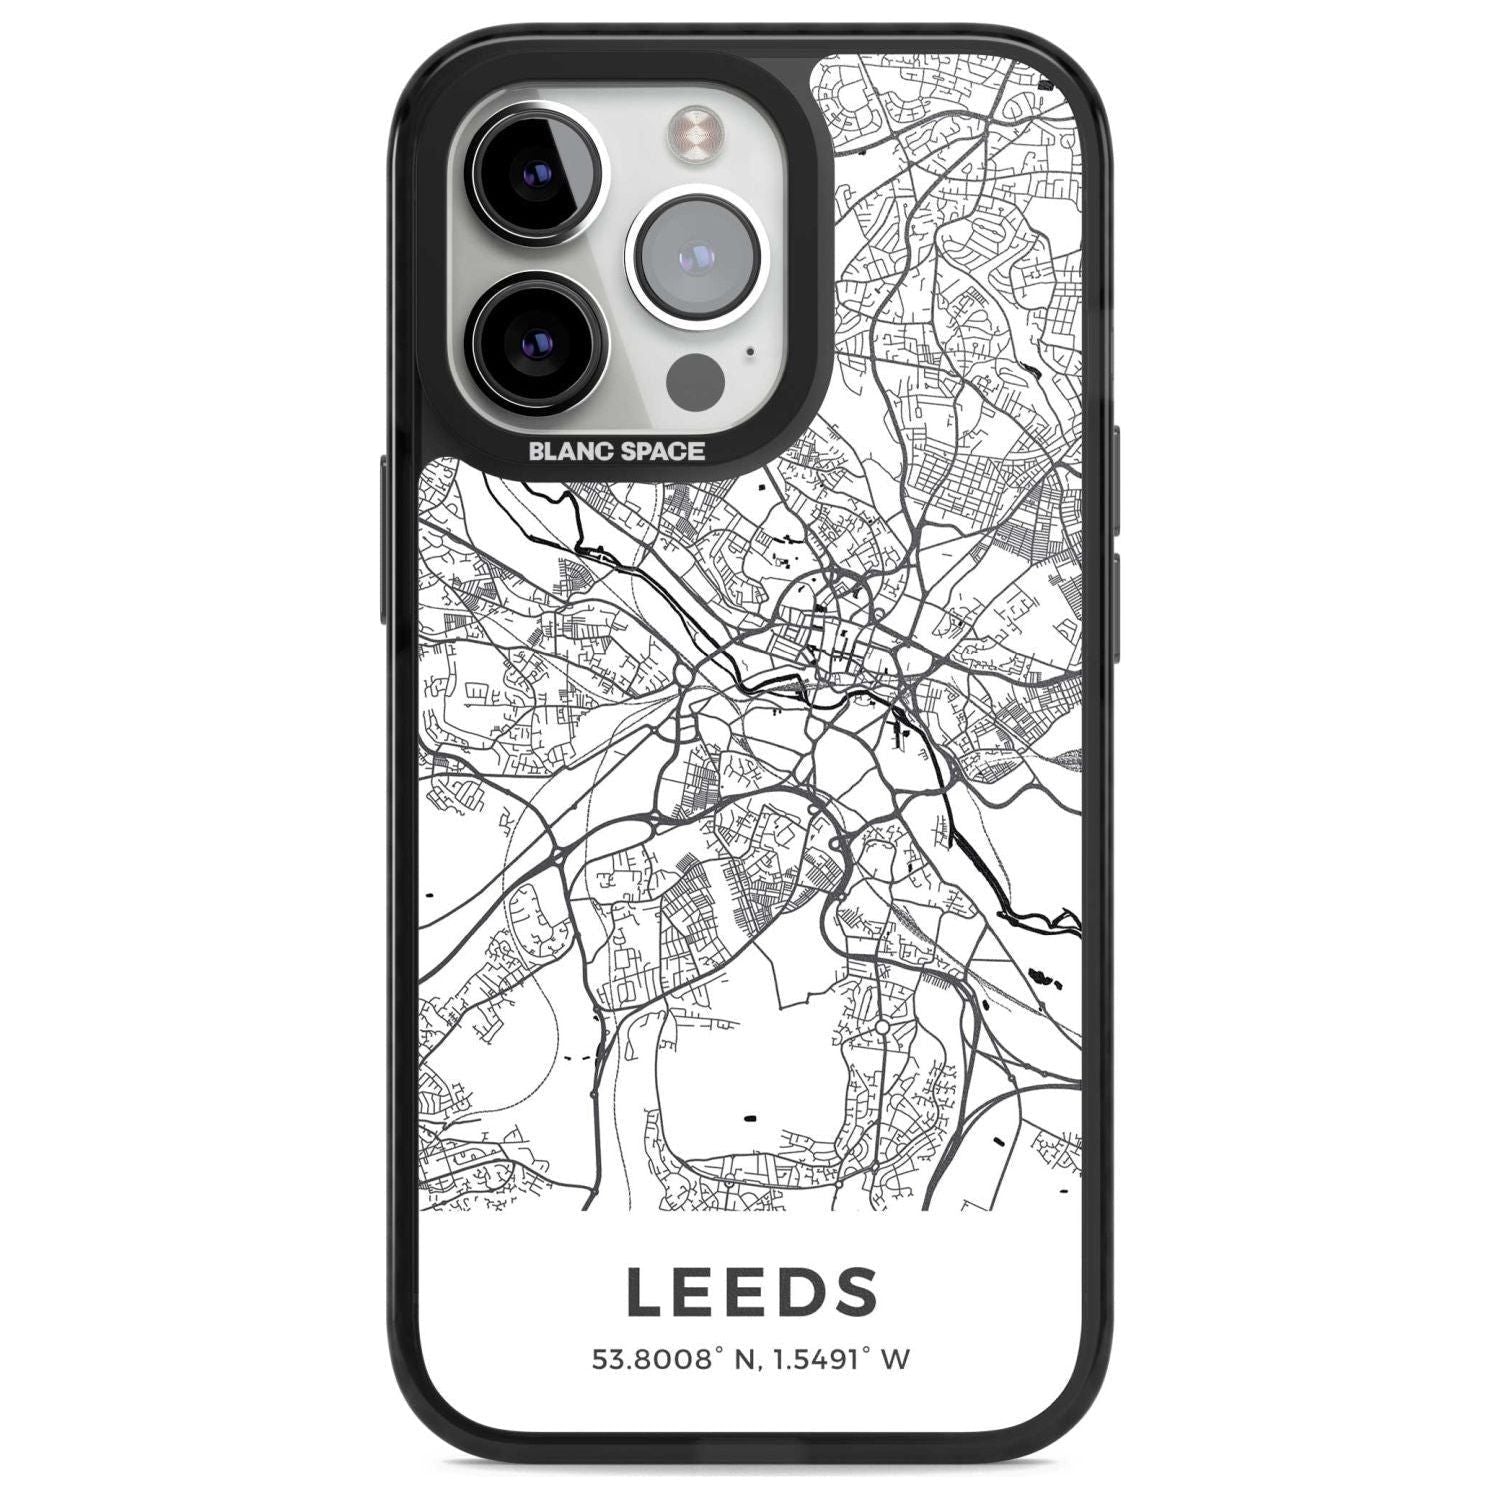 Map of Leeds, England Phone Case iPhone 15 Pro Max / Magsafe Black Impact Case,iPhone 15 Pro / Magsafe Black Impact Case,iPhone 14 Pro Max / Magsafe Black Impact Case,iPhone 14 Pro / Magsafe Black Impact Case,iPhone 13 Pro / Magsafe Black Impact Case Blanc Space